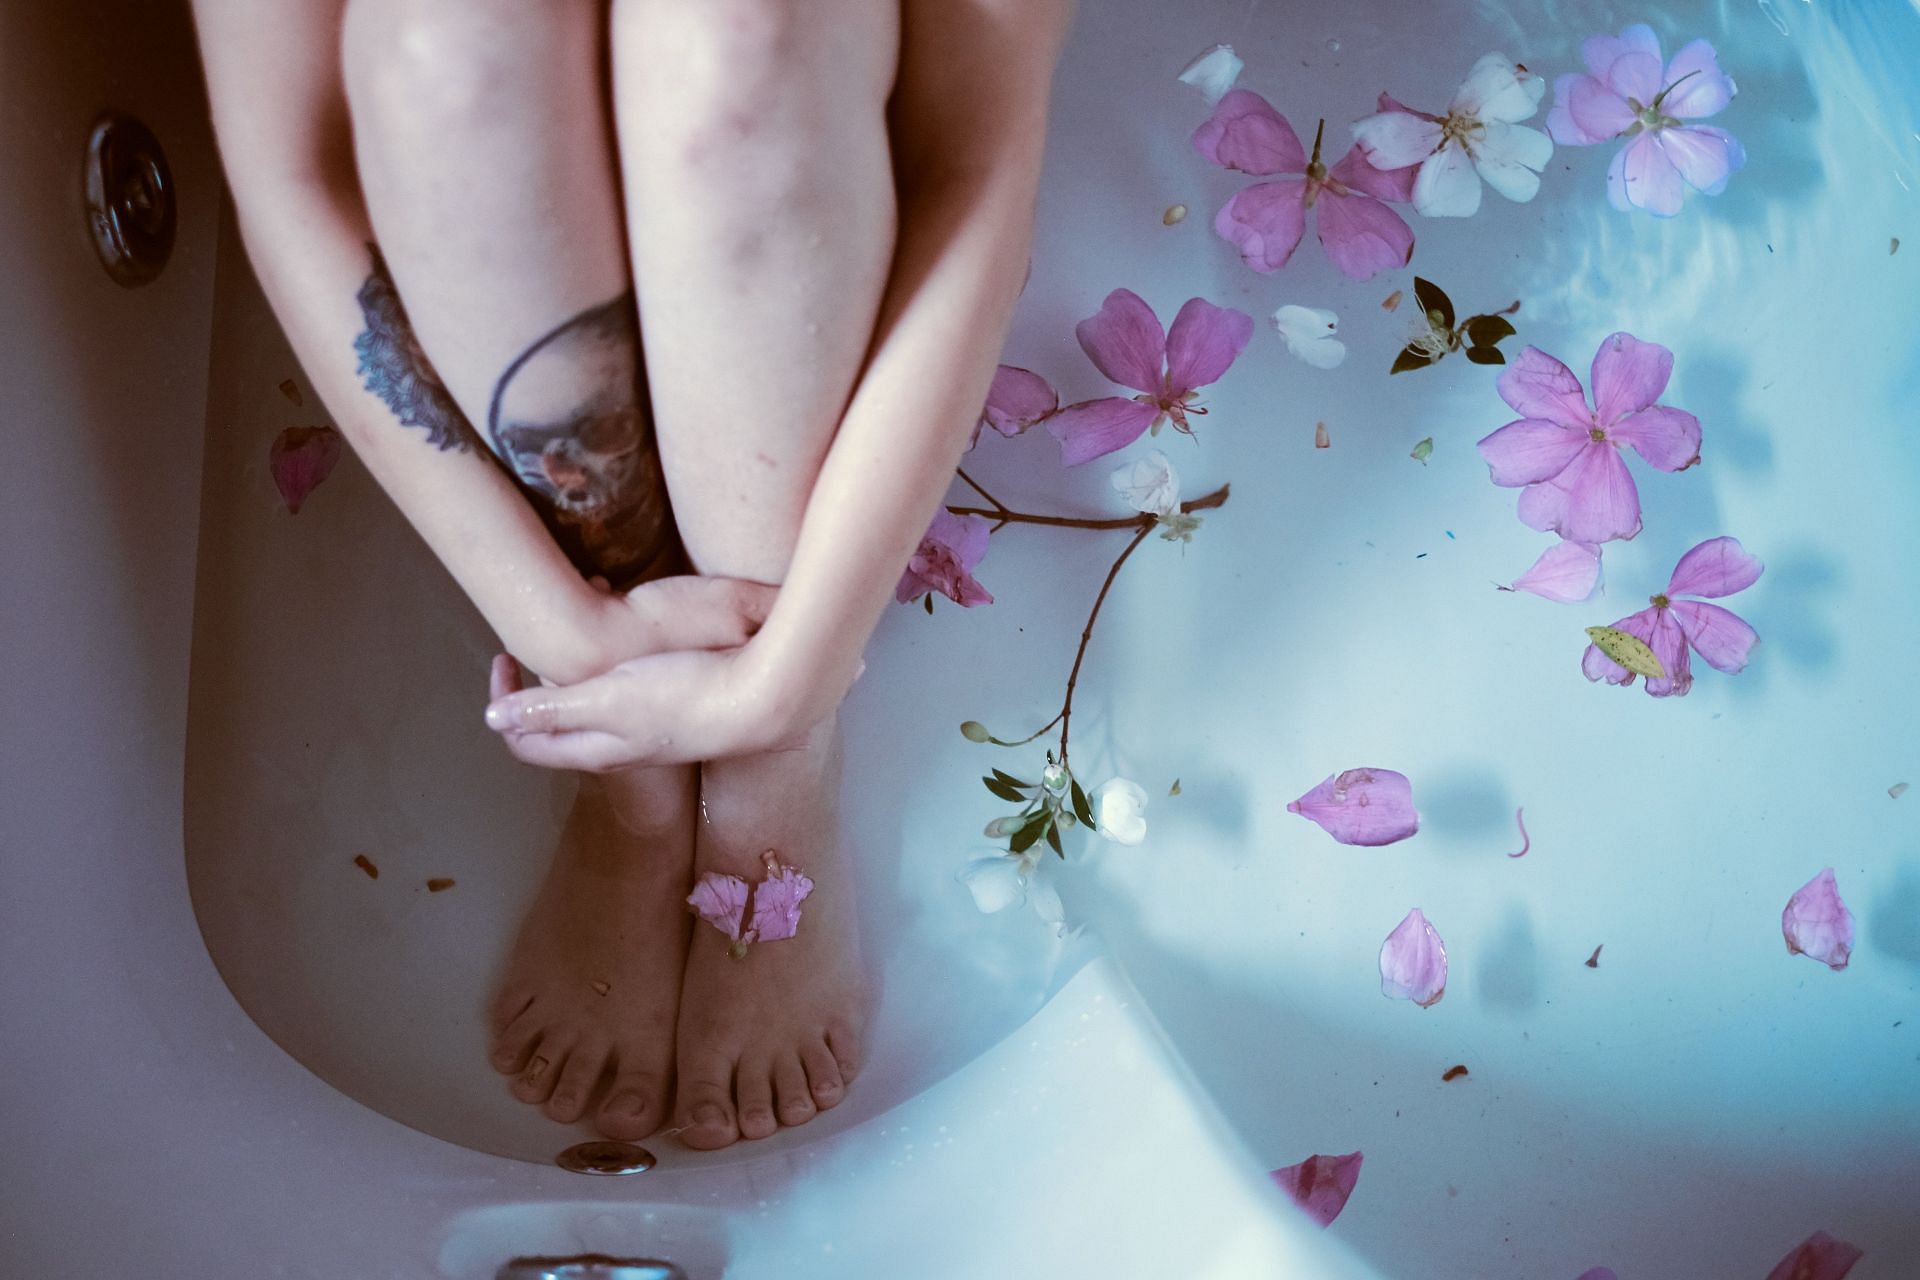 Some people believe that foot detox helps in feeling relaxed. (Image via Pexels/Camila Cordeiro)